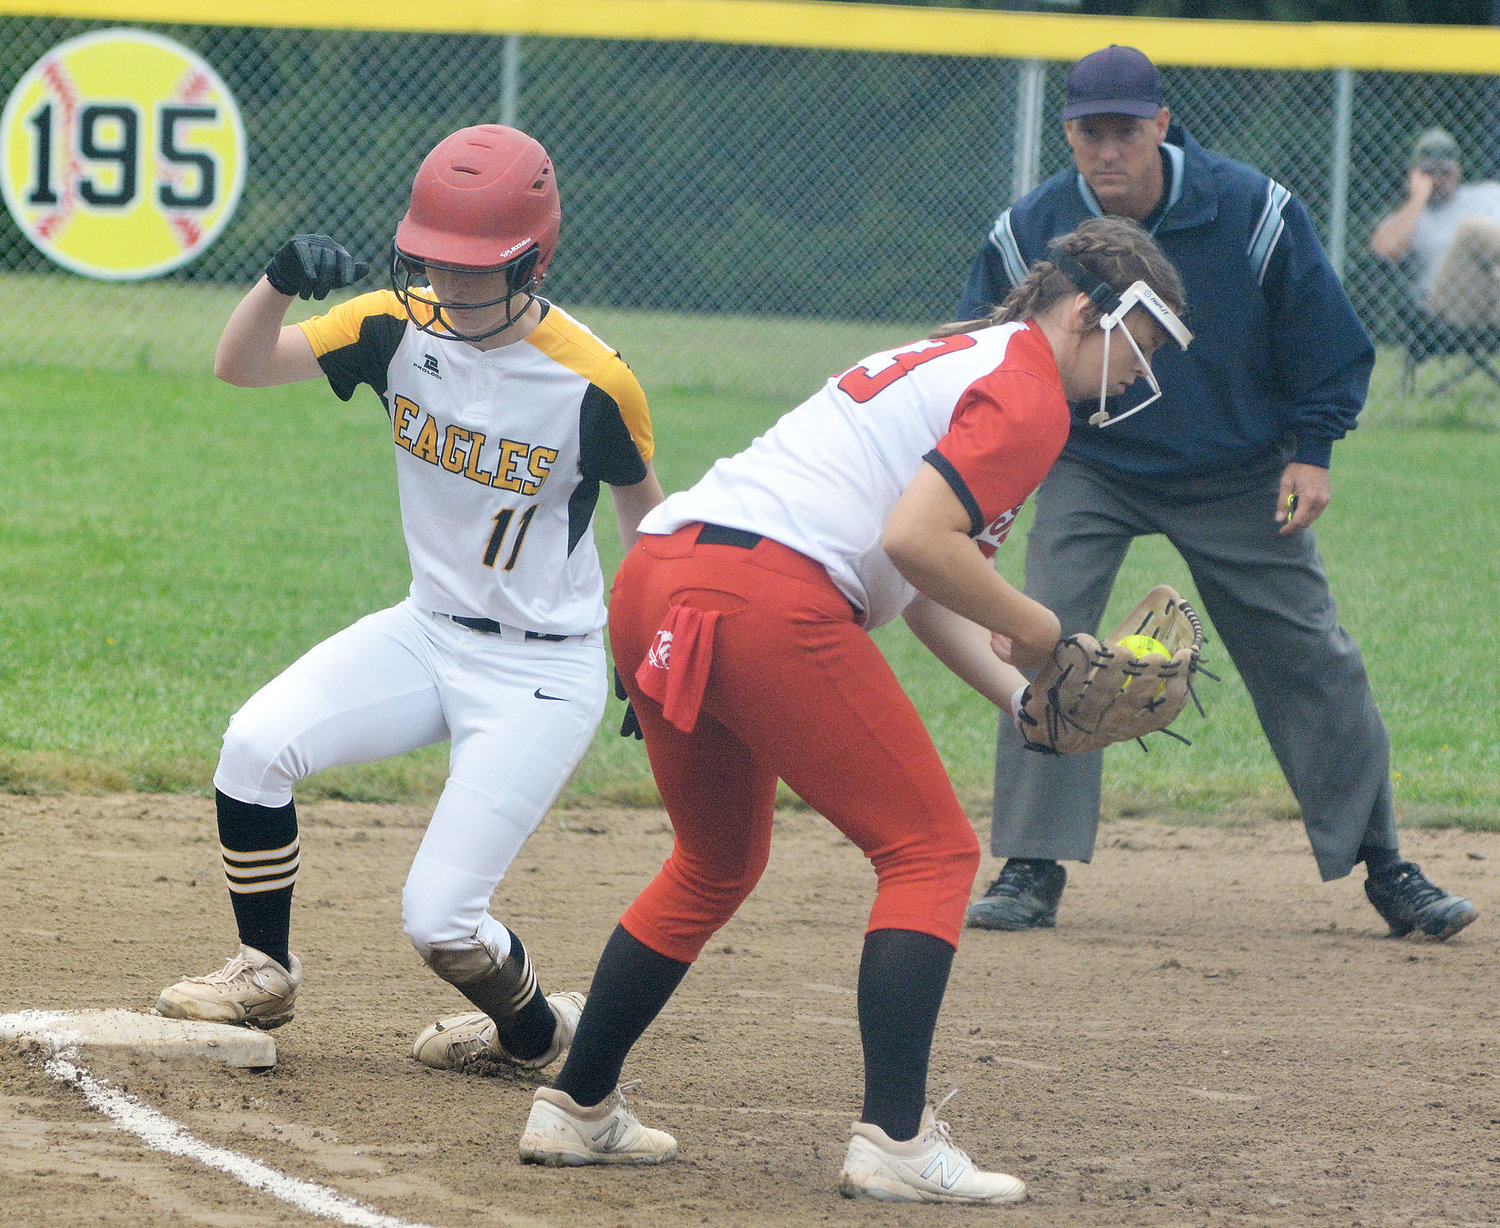 Tori Schulte (at left) stands up safely at third base before Tuscumbia could attempt to tag her out during a recent softball game earlier this month at Vienna City Park.